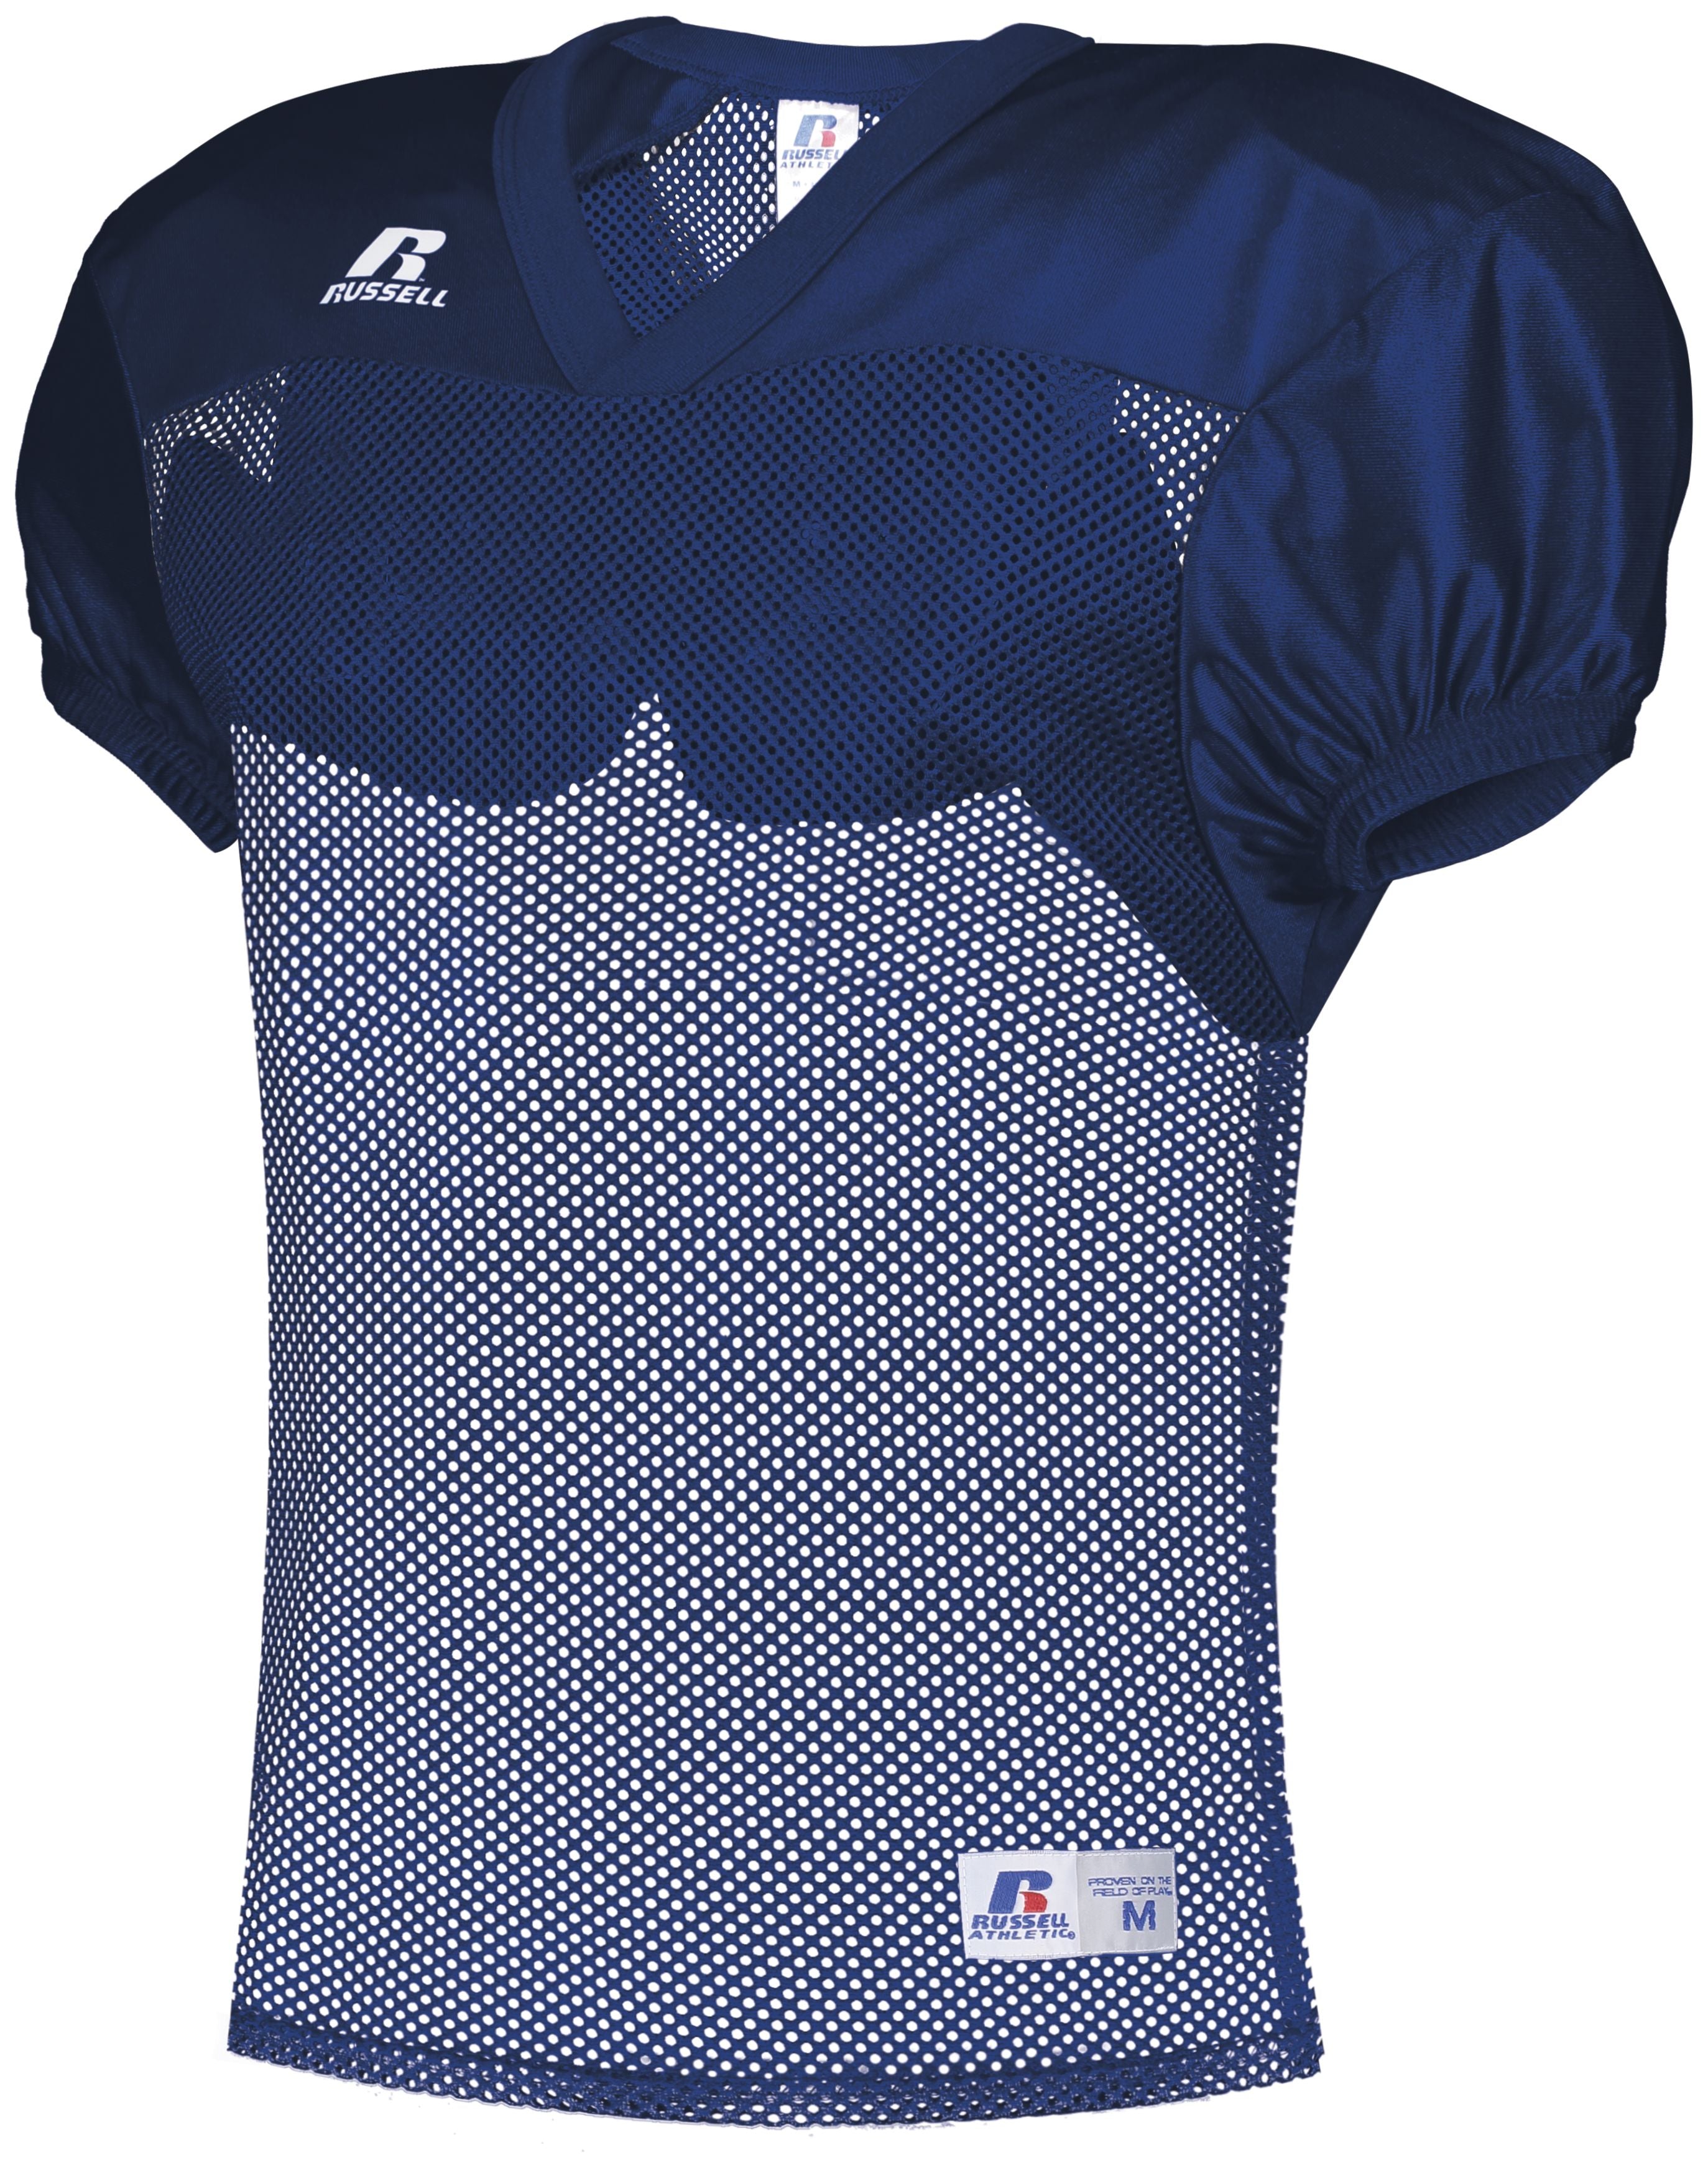 Russell Athletic Stock Practice Jersey in Navy  -Part of the Adult, Adult-Jersey, Football, Russell-Athletic-Products, Shirts, All-Sports, All-Sports-1 product lines at KanaleyCreations.com